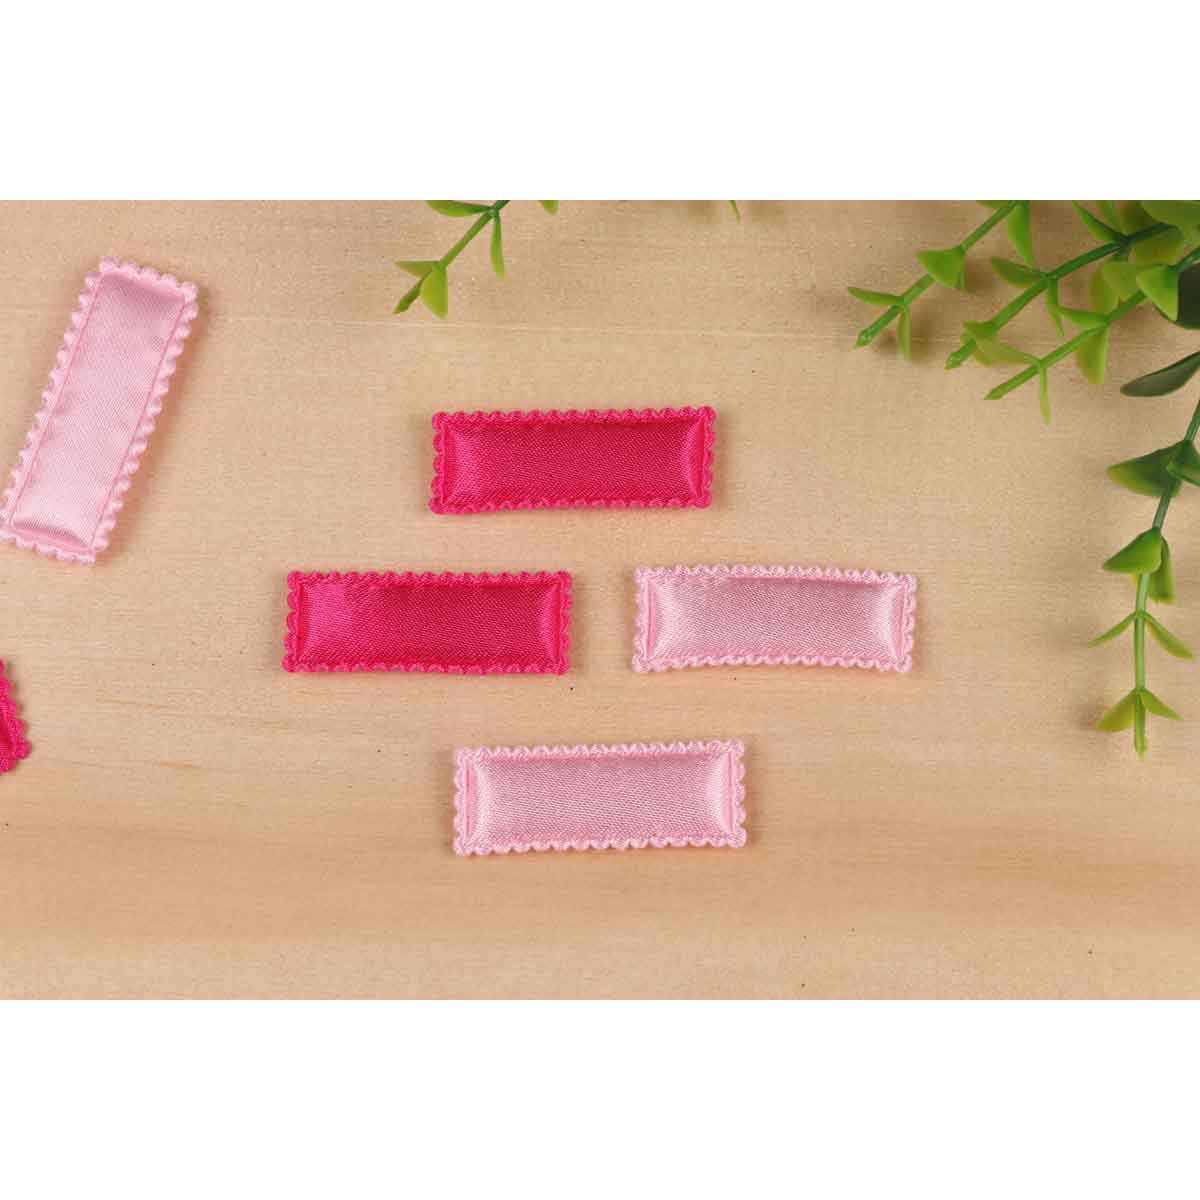 100 Padded Satin Hair Clip Covers 35mm-Hot Pink/Pink